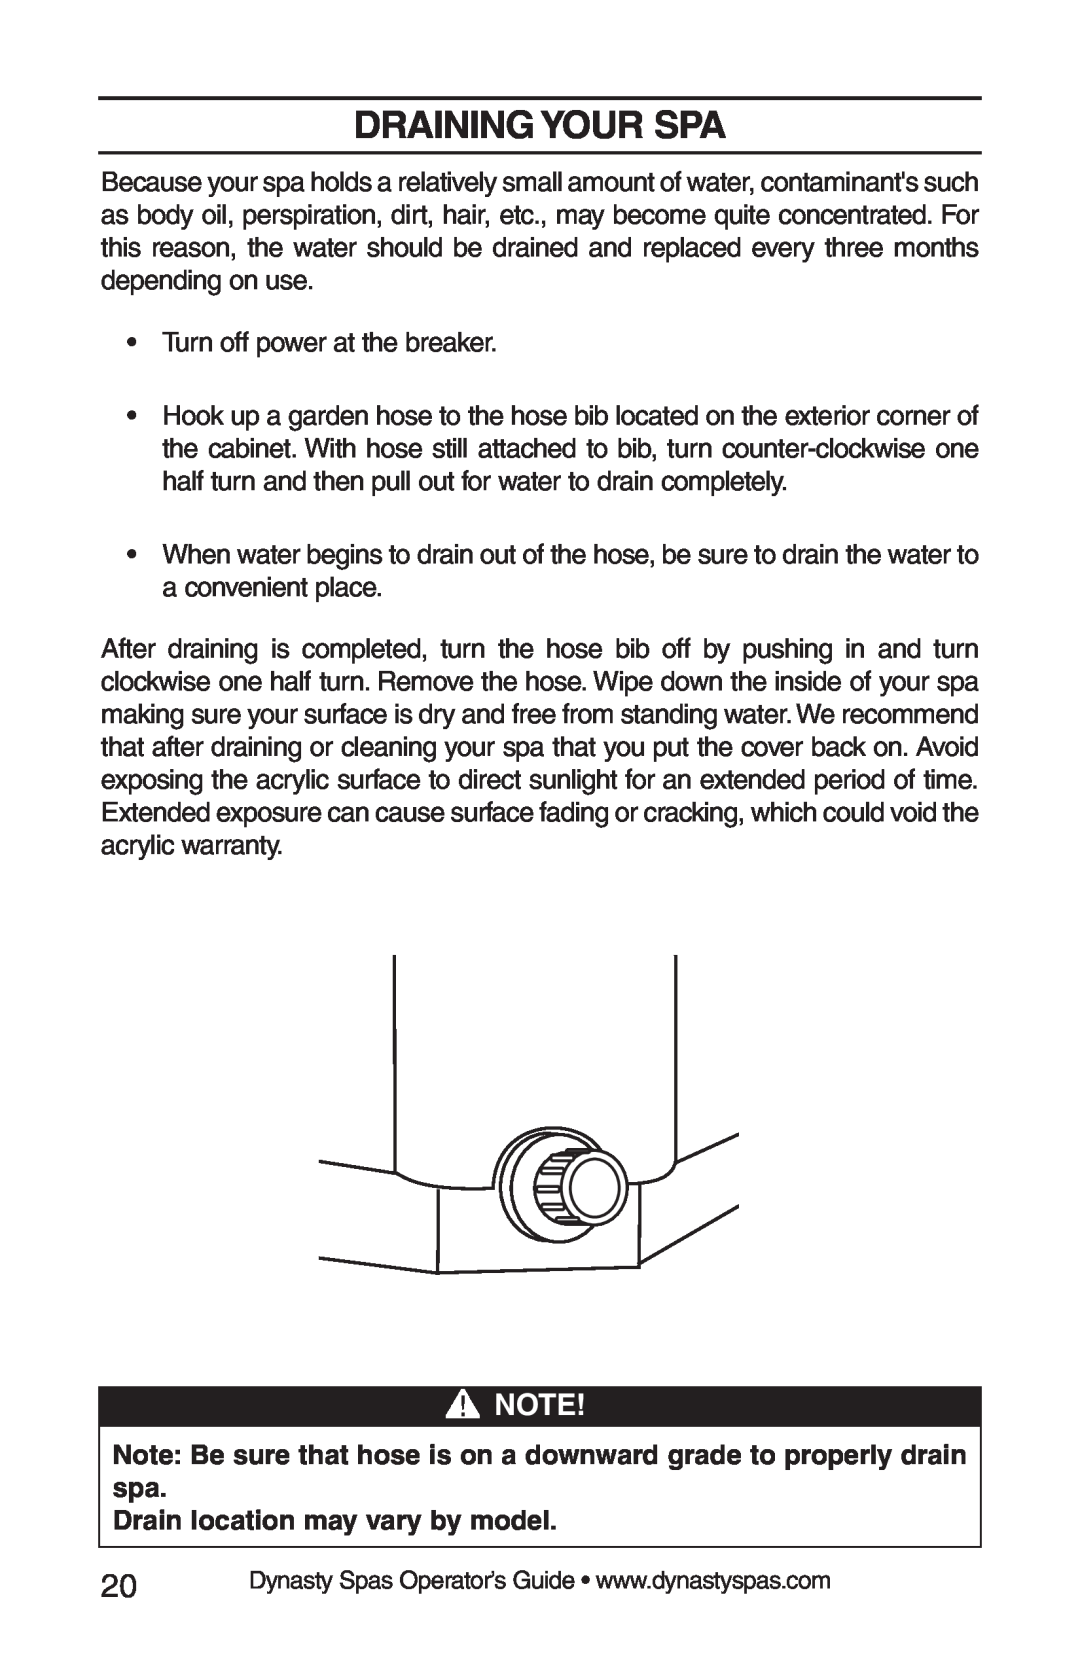 Dynasty Spas 2008 manual Draining Your Spa, Note Be sure that hose is on a downward grade to properly drain spa 